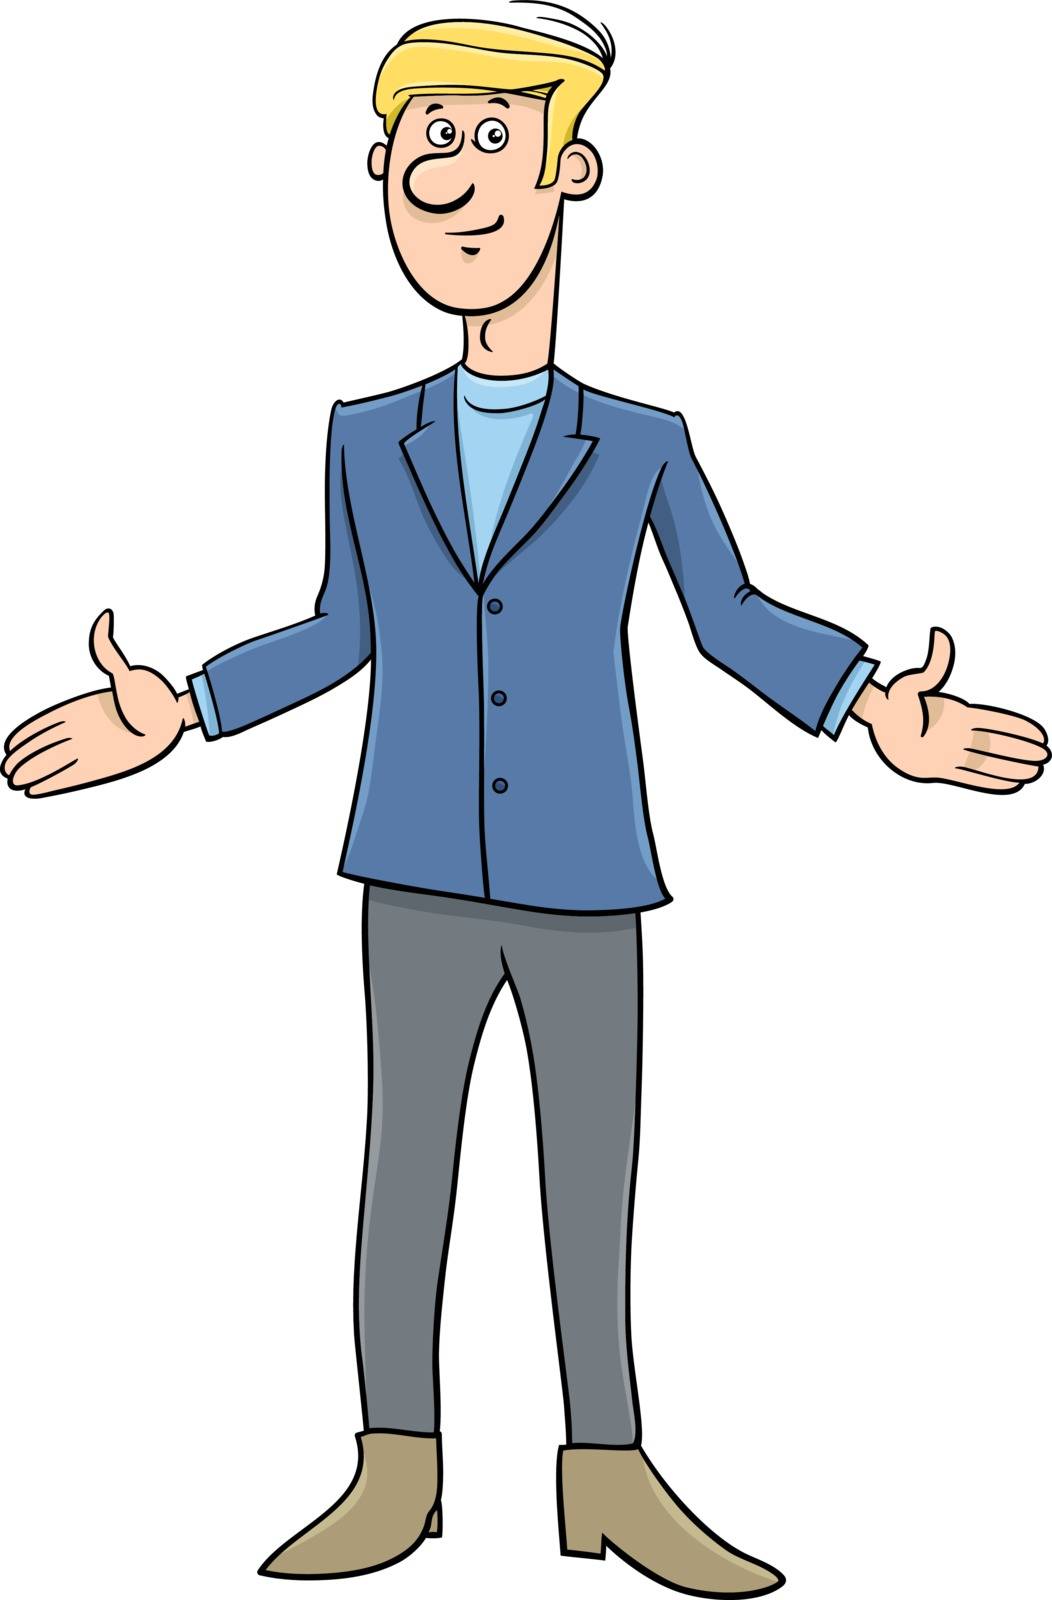 Cartoon Illustration of Young Man or Businessman Character